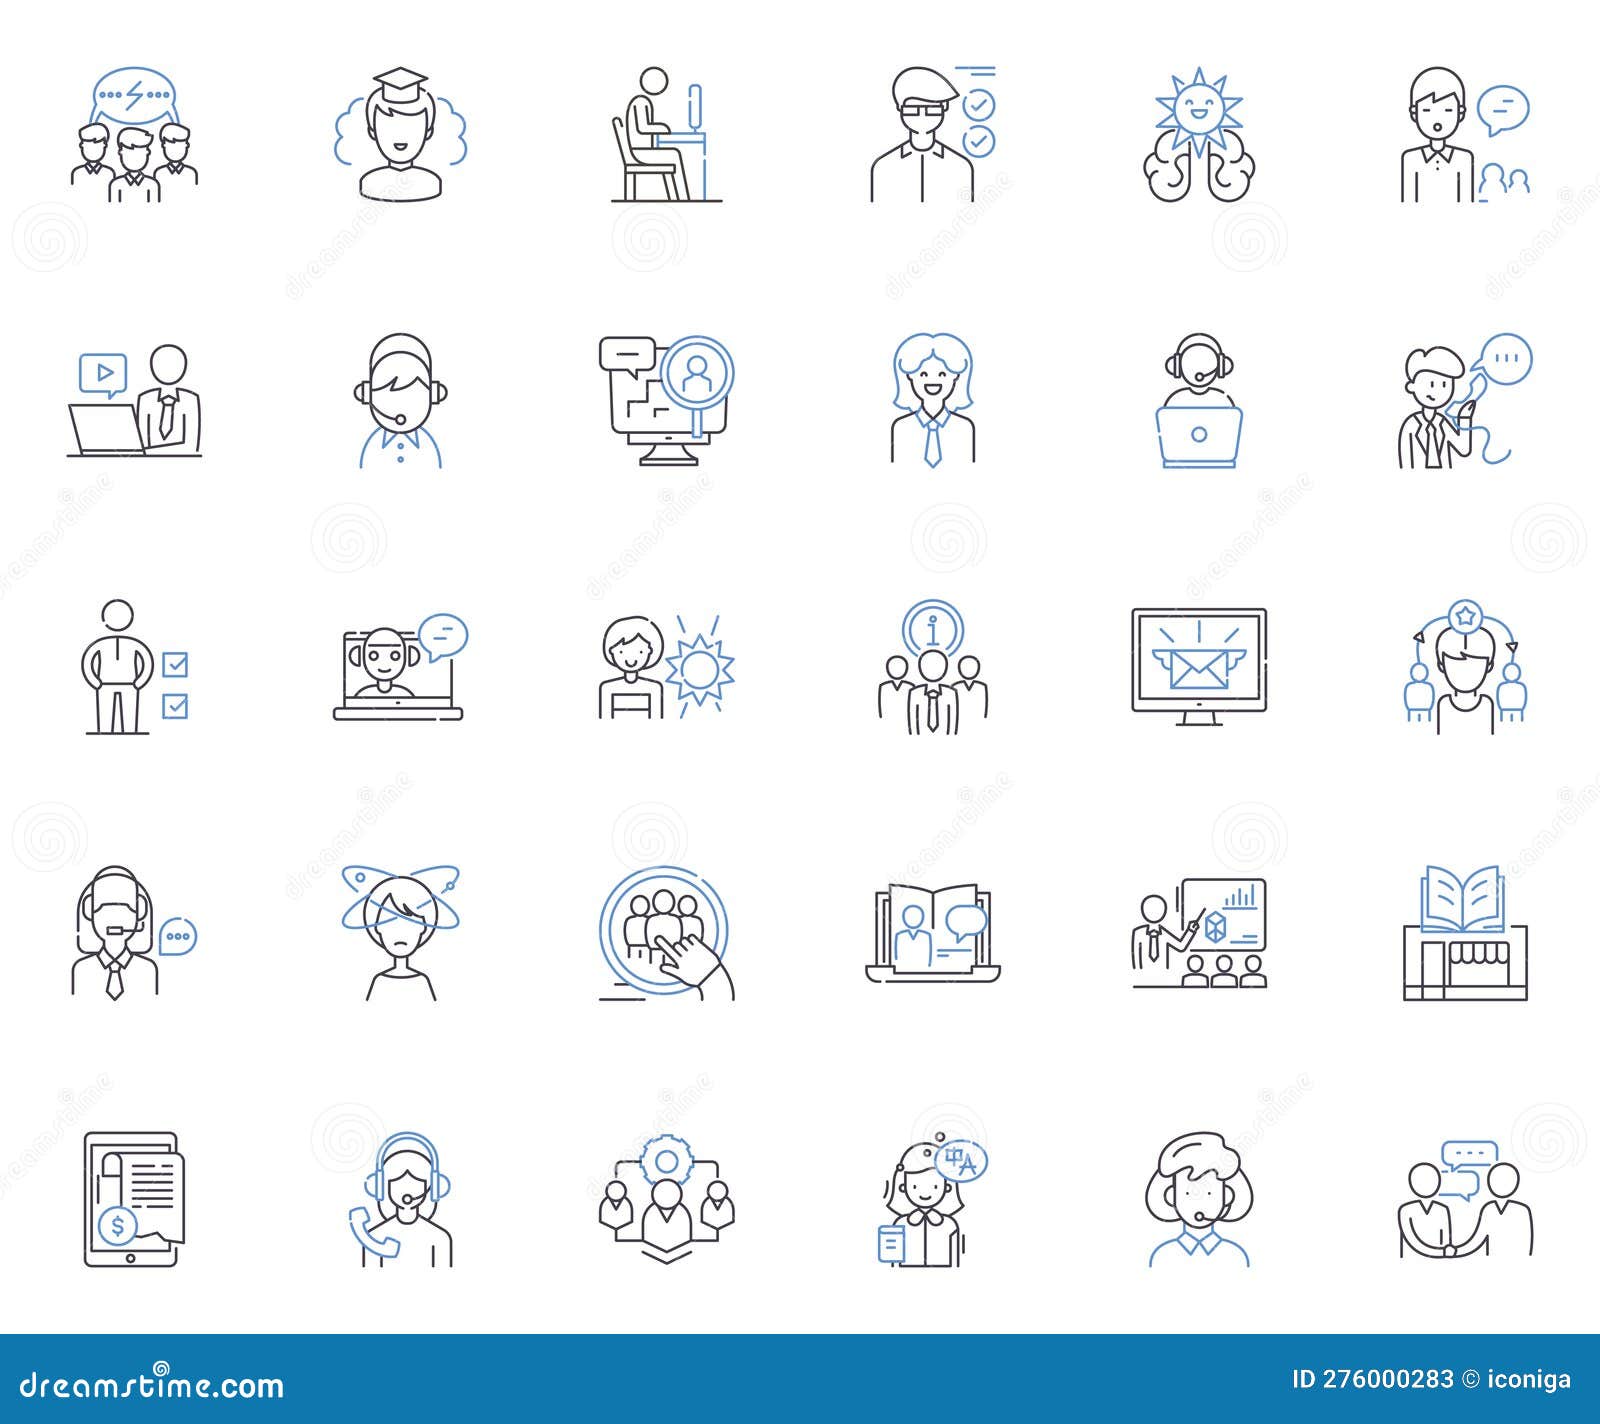 guide line icons collection. navigate, assist, lead, instruct, mentor, direct, teach  and linear 